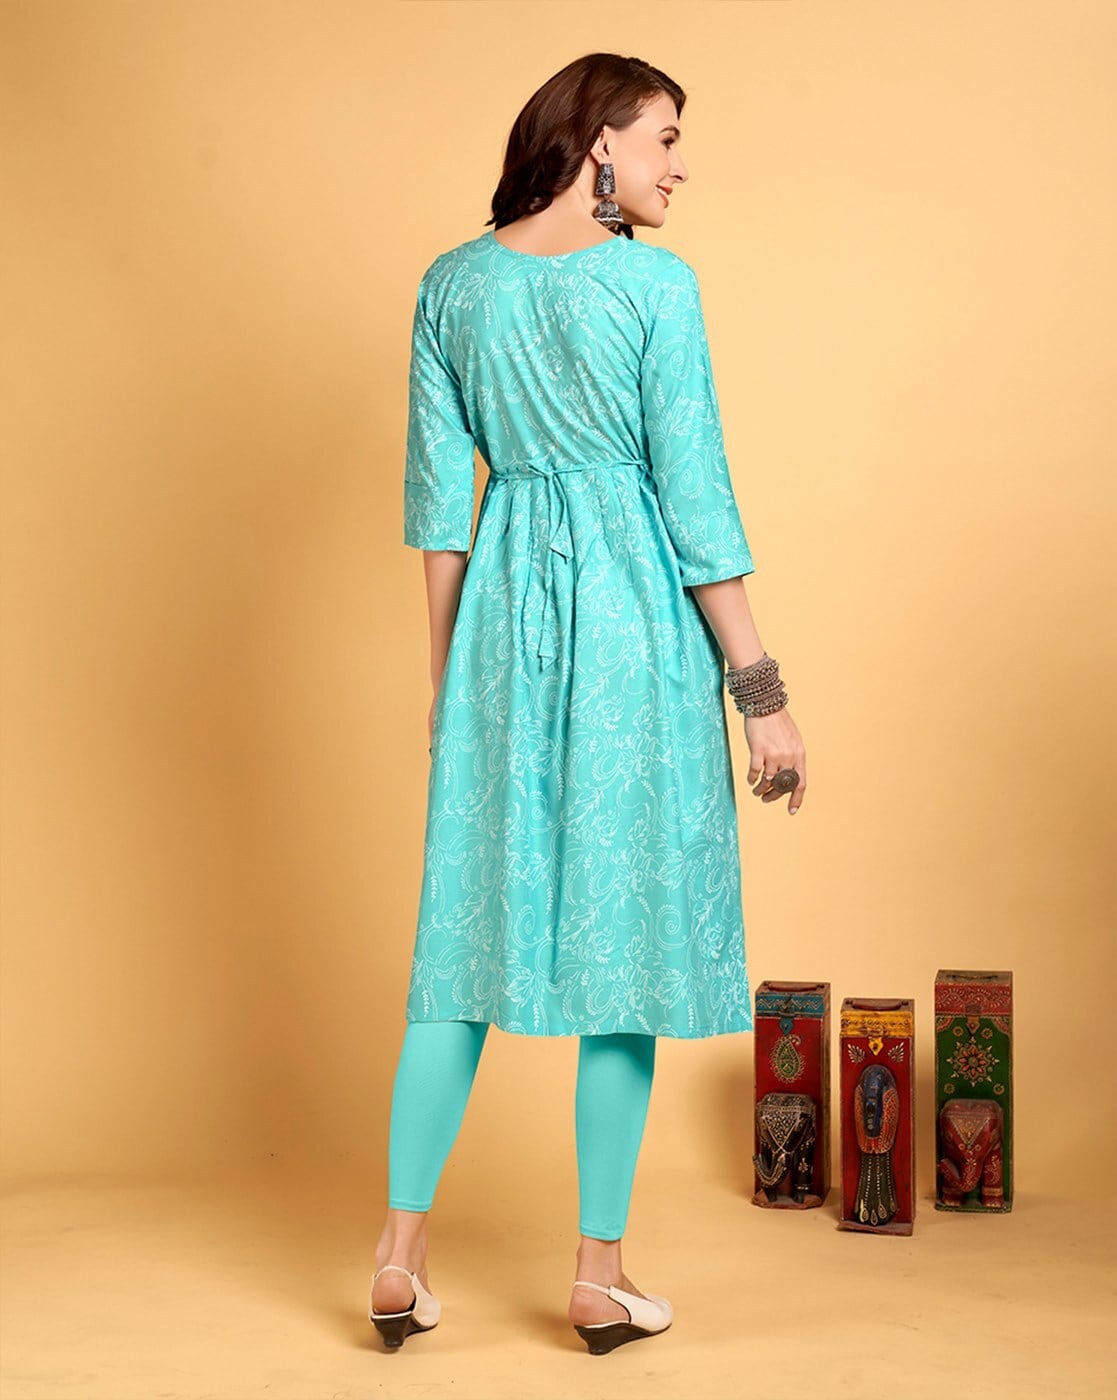 Buy Store Chikankari Women's Faux Georgette Buta Jaal Kurti with Inner (Turquoise  Blue, s) at Amazon.in